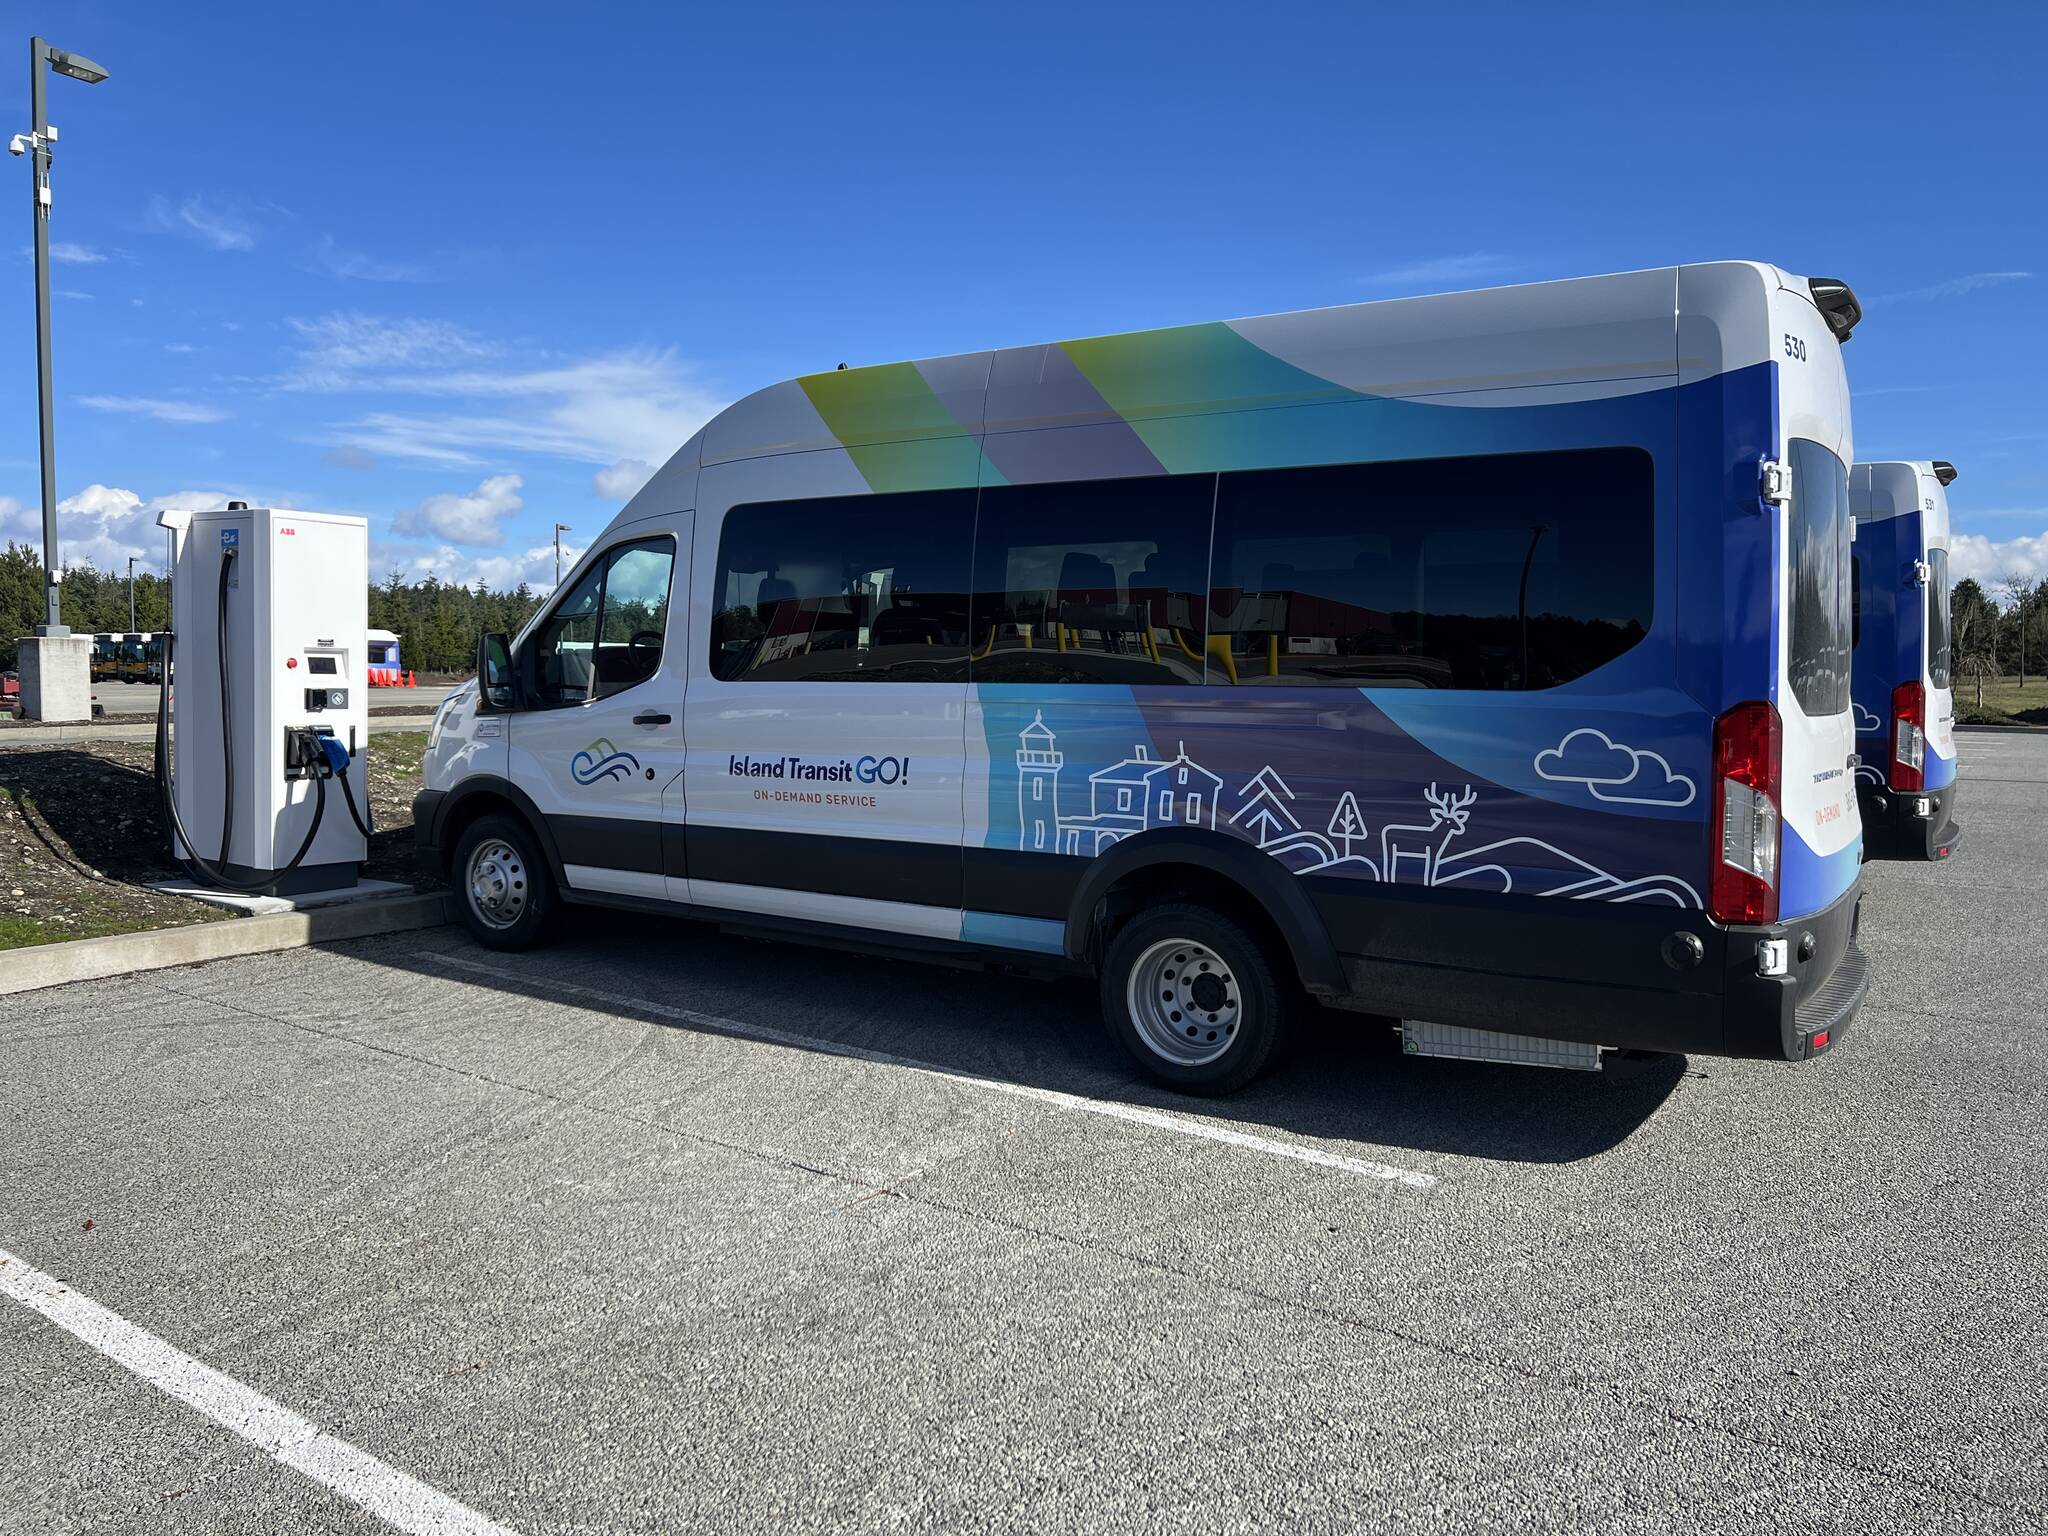 Since last March, Island Transit installed two new vehicle charging stations at the Coupeville transit facility. (Photo courtesy of Island Transit)